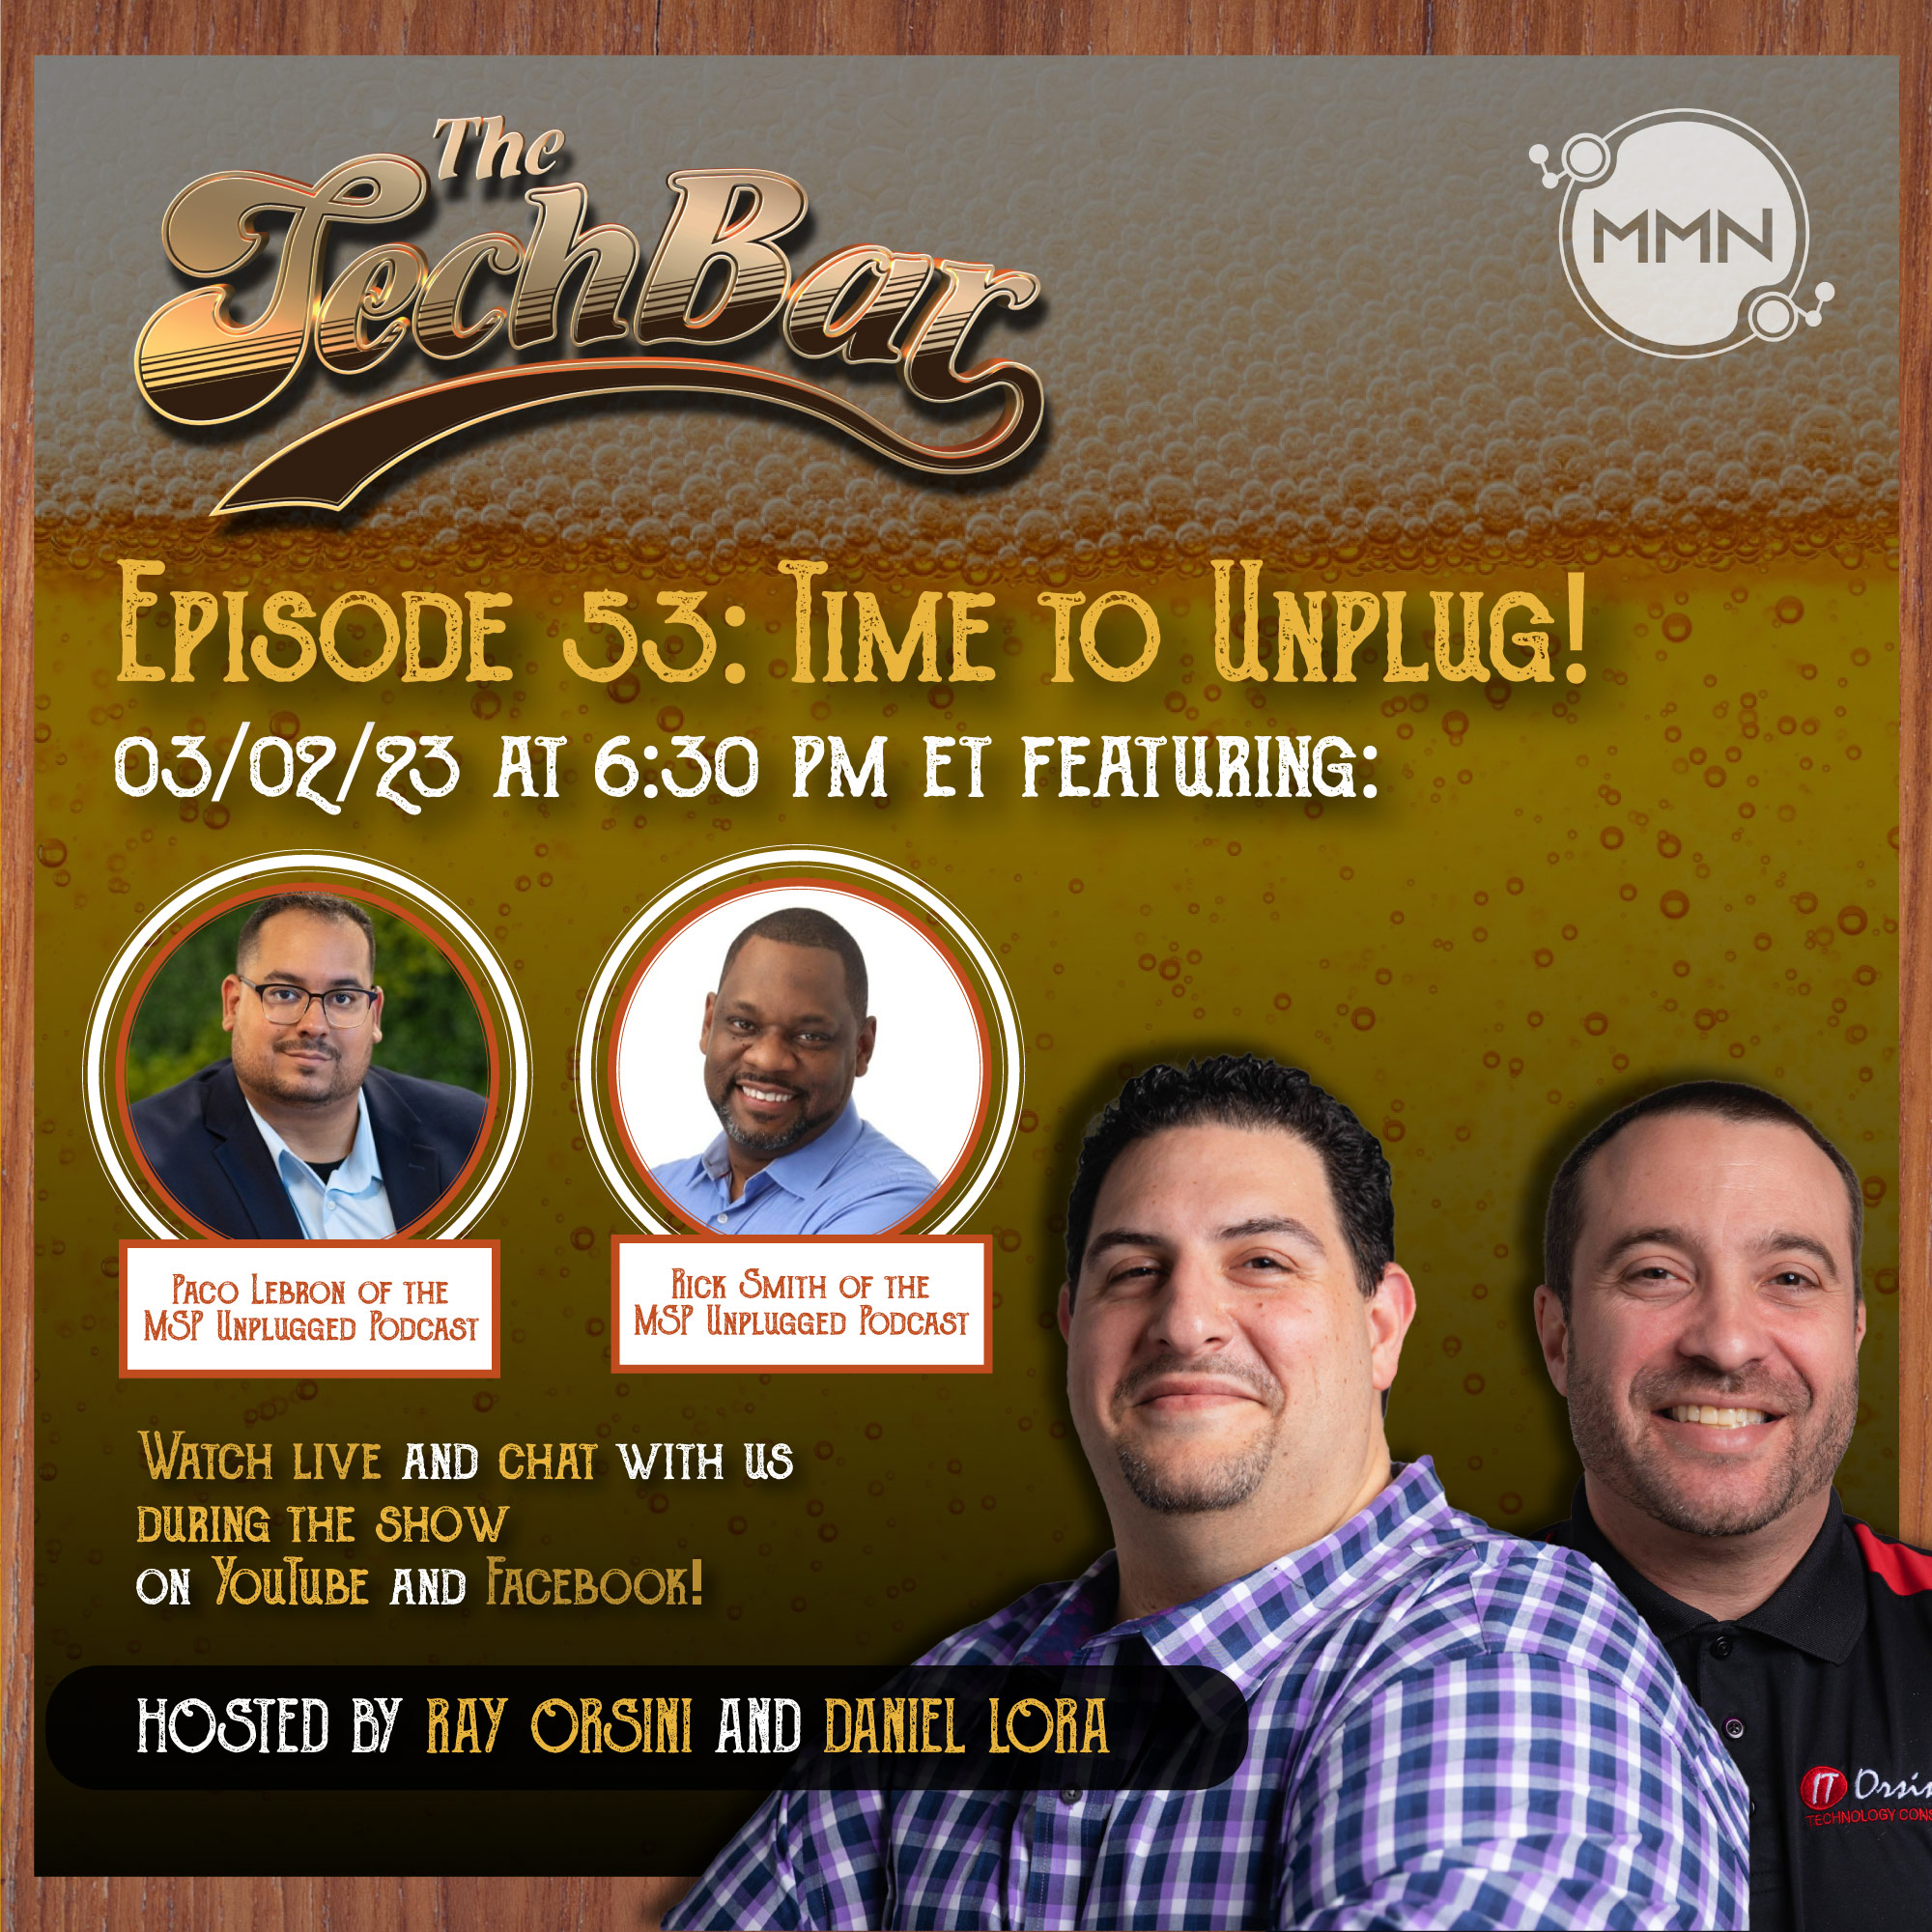 The Tech Bar Ep. 53 with Paco Lebron and Rick Smith of MSP Unplugged (Audio)